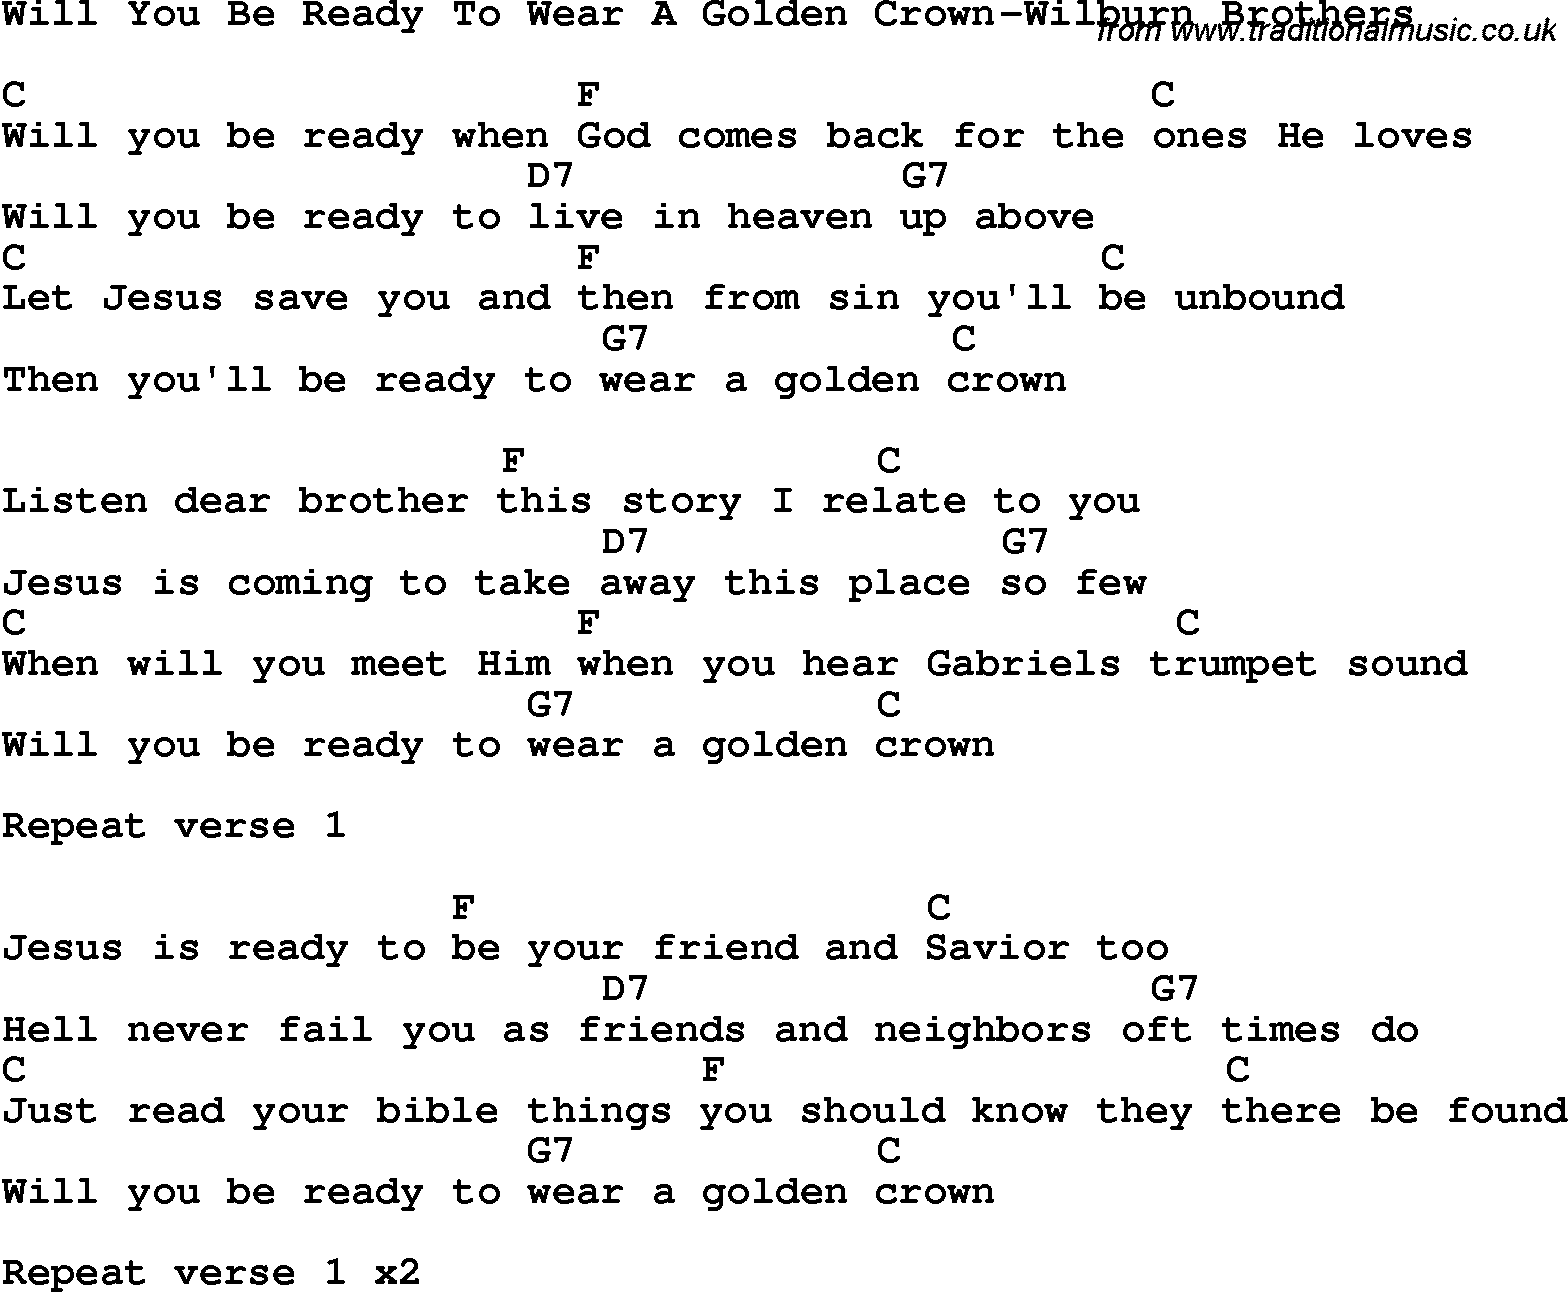 Country, Southern and Bluegrass Gospel Song Will You Be Ready To Wear A Golden Crown-Wilburn Brothers lyrics and chords